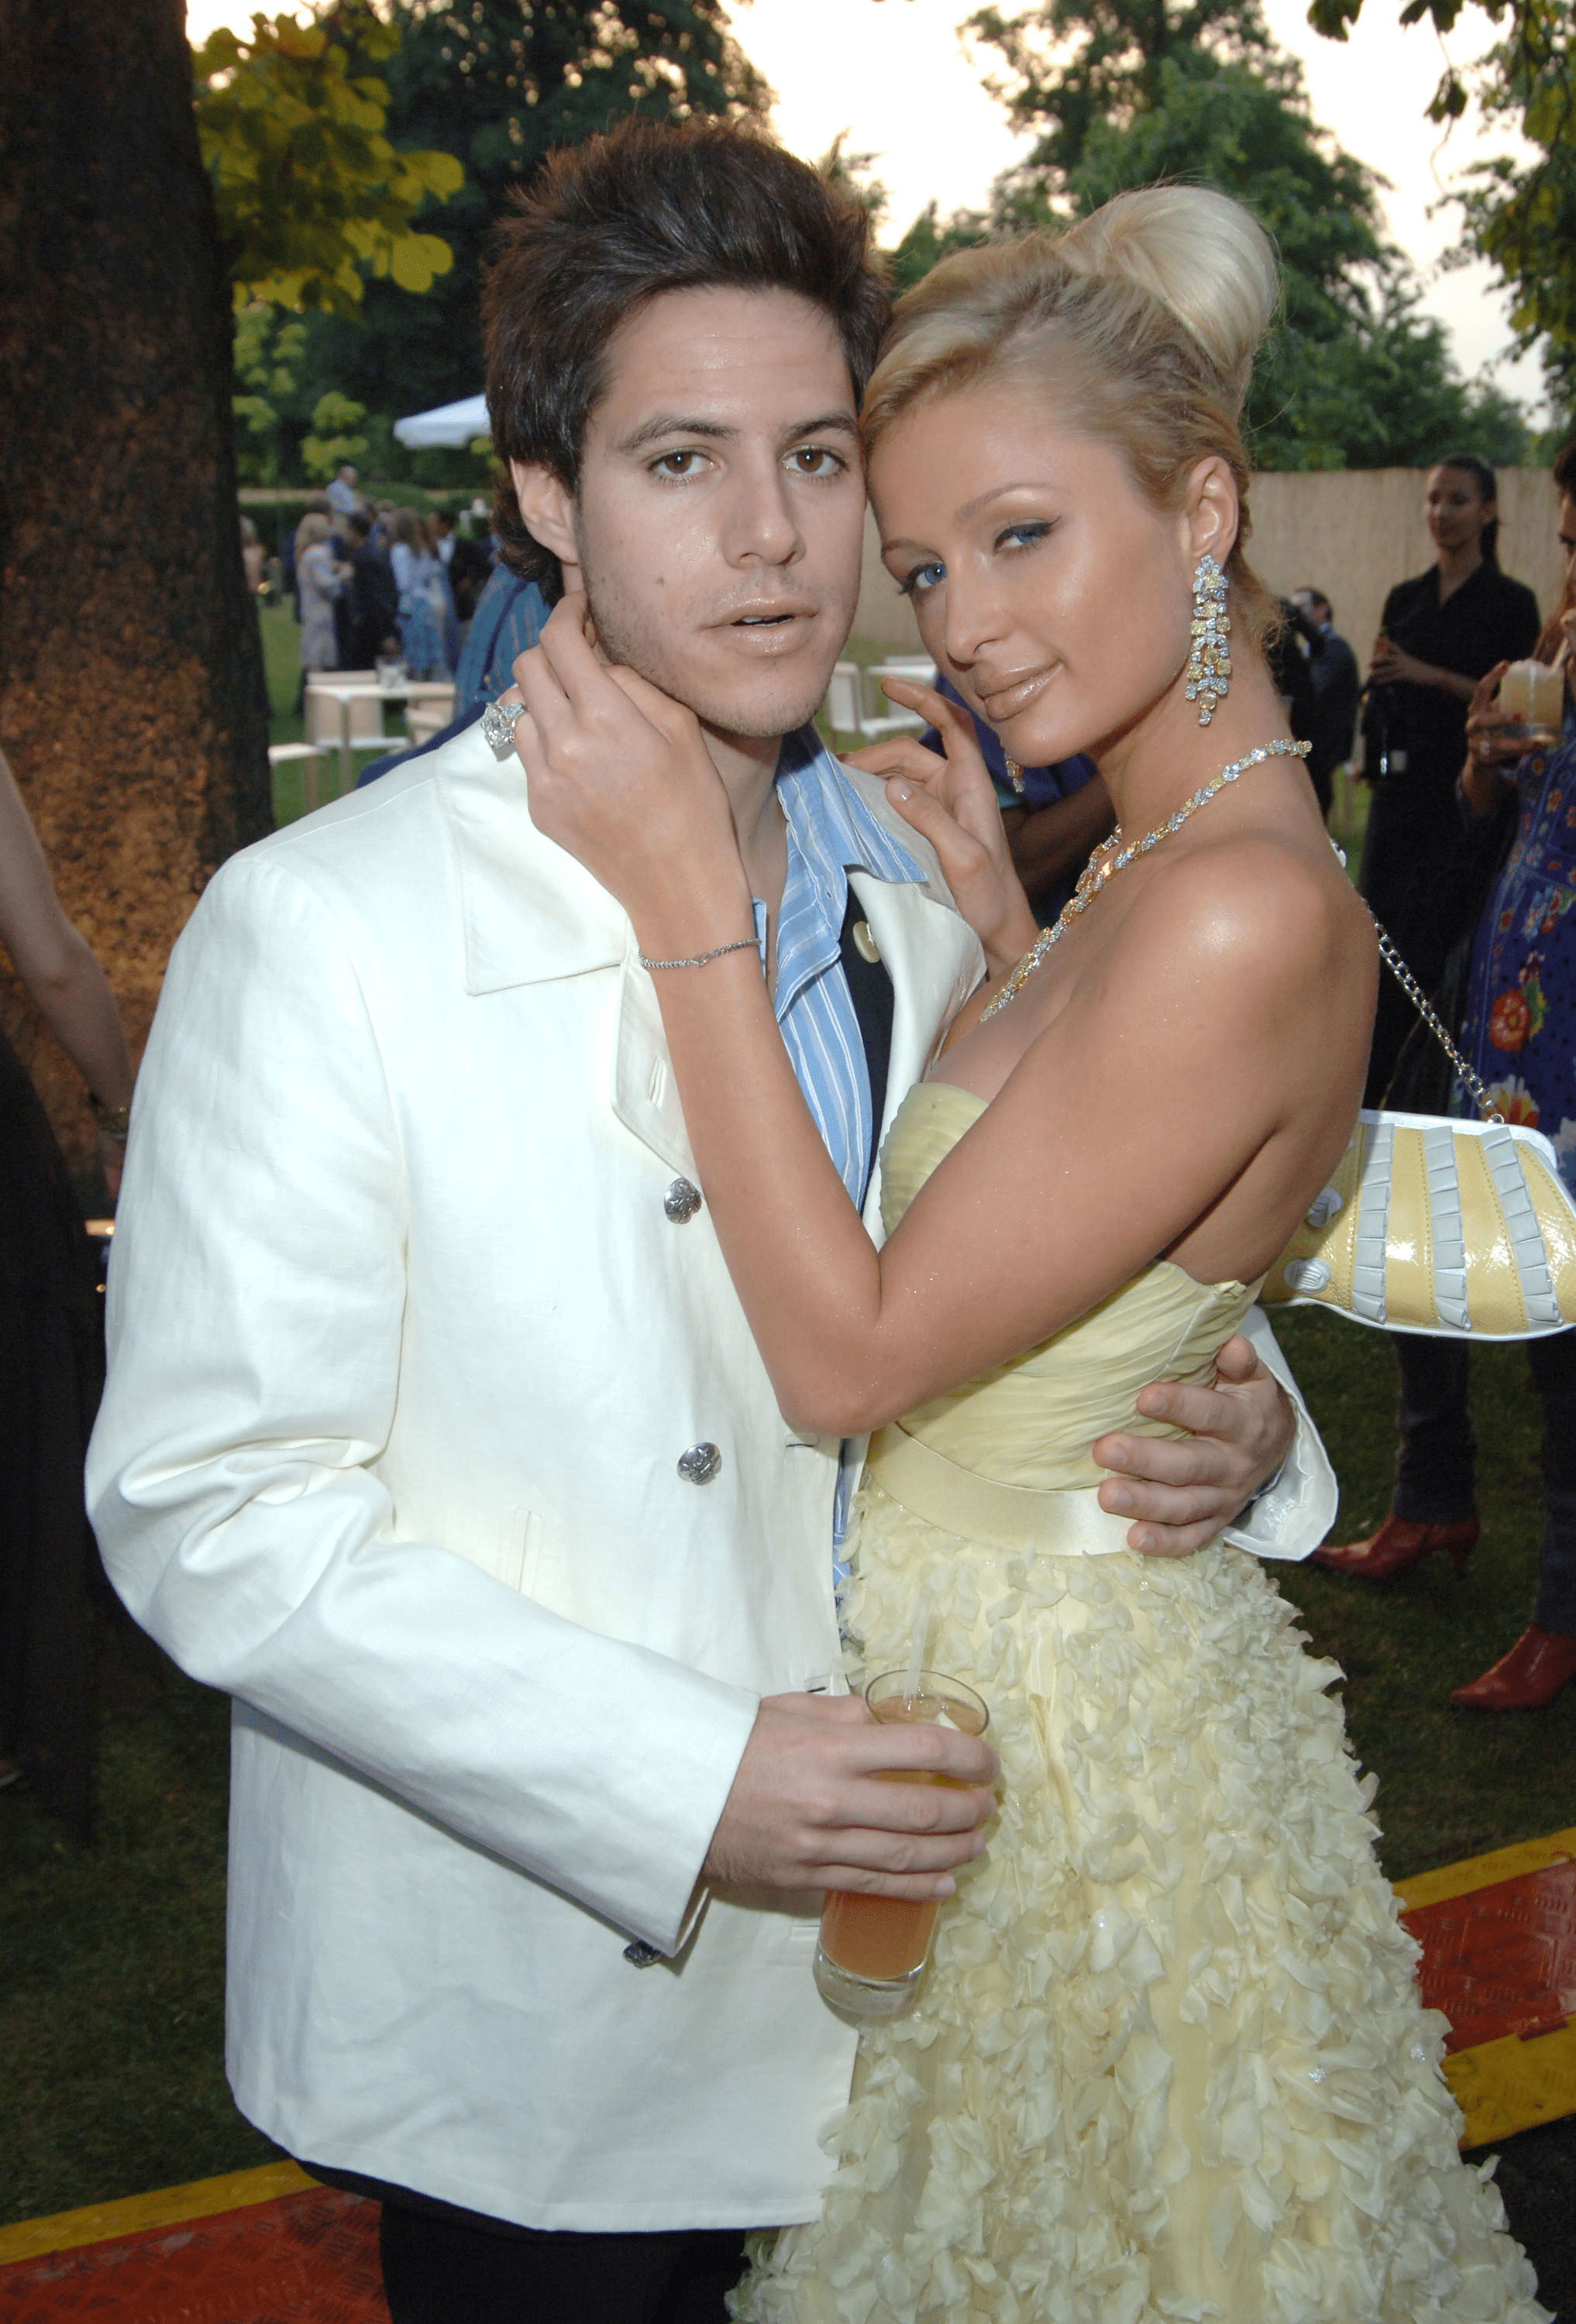 Paris Latsis and Paris Hilton at The Serpentine Gallery on June 30, 2005, in London | Source: Getty Images